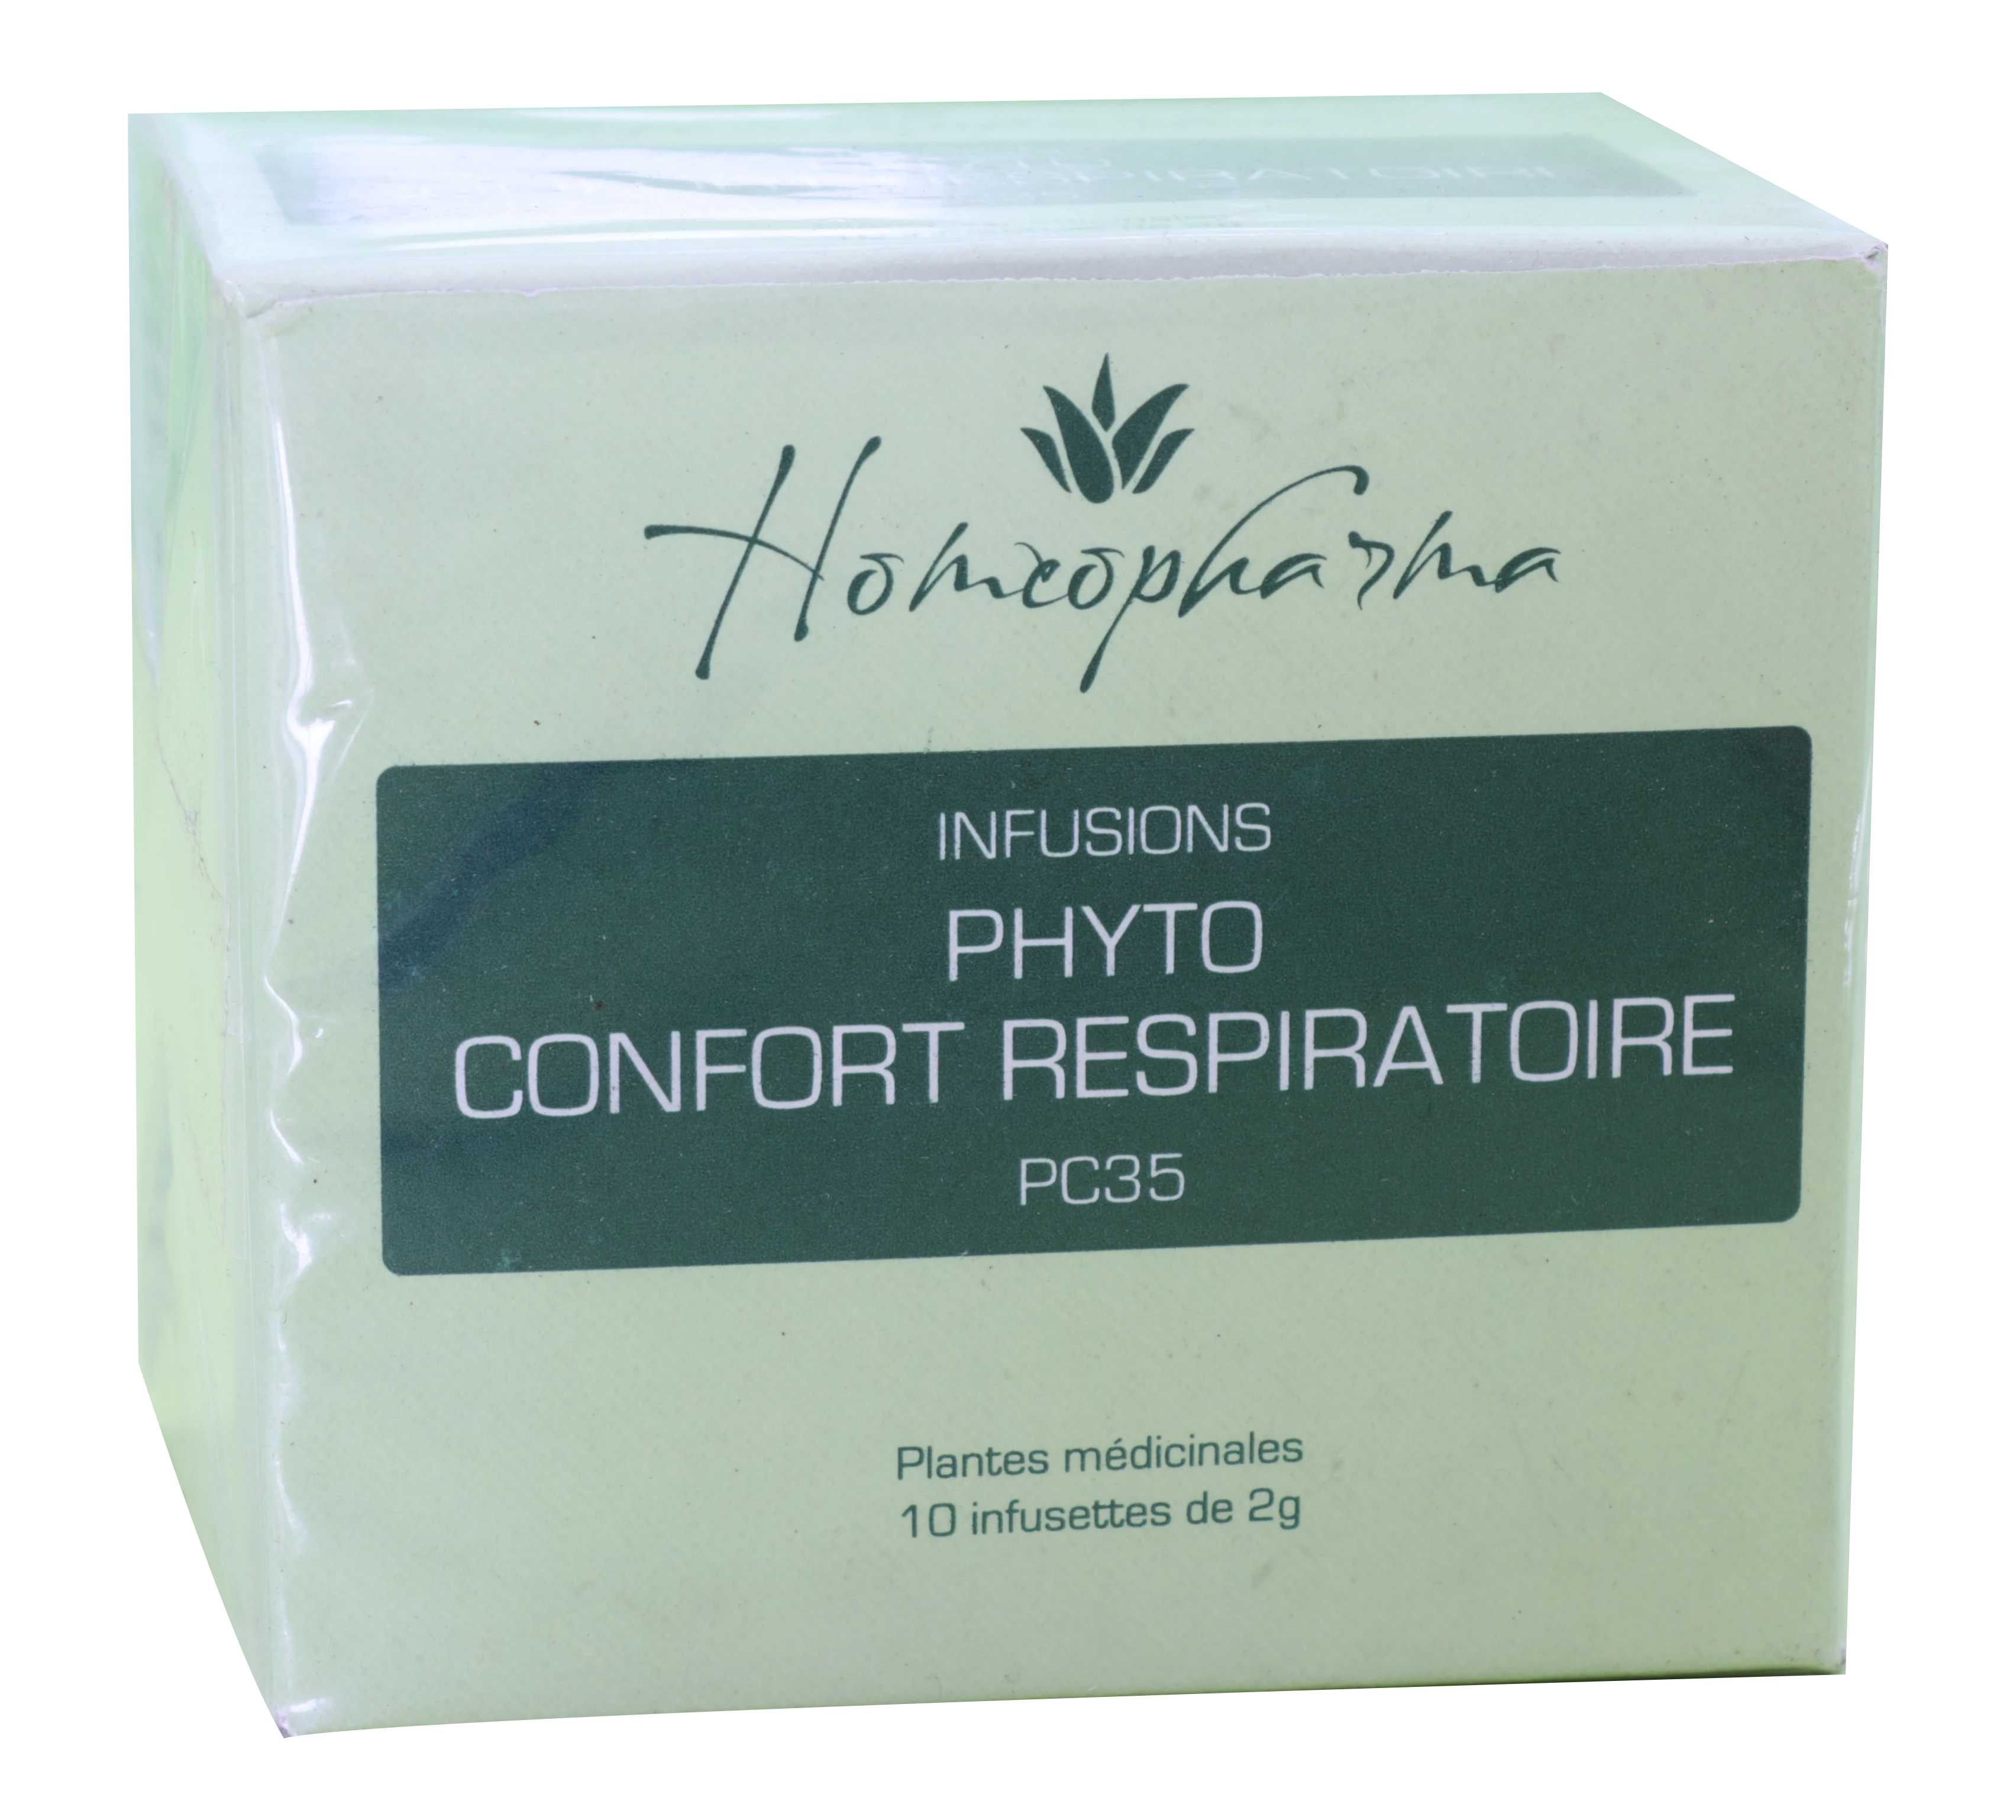 Phytotherapie Traditionnelle Pc35 Phyto Confort Respiratoire Bte 20 Infusettes - HOMEOPHARMA